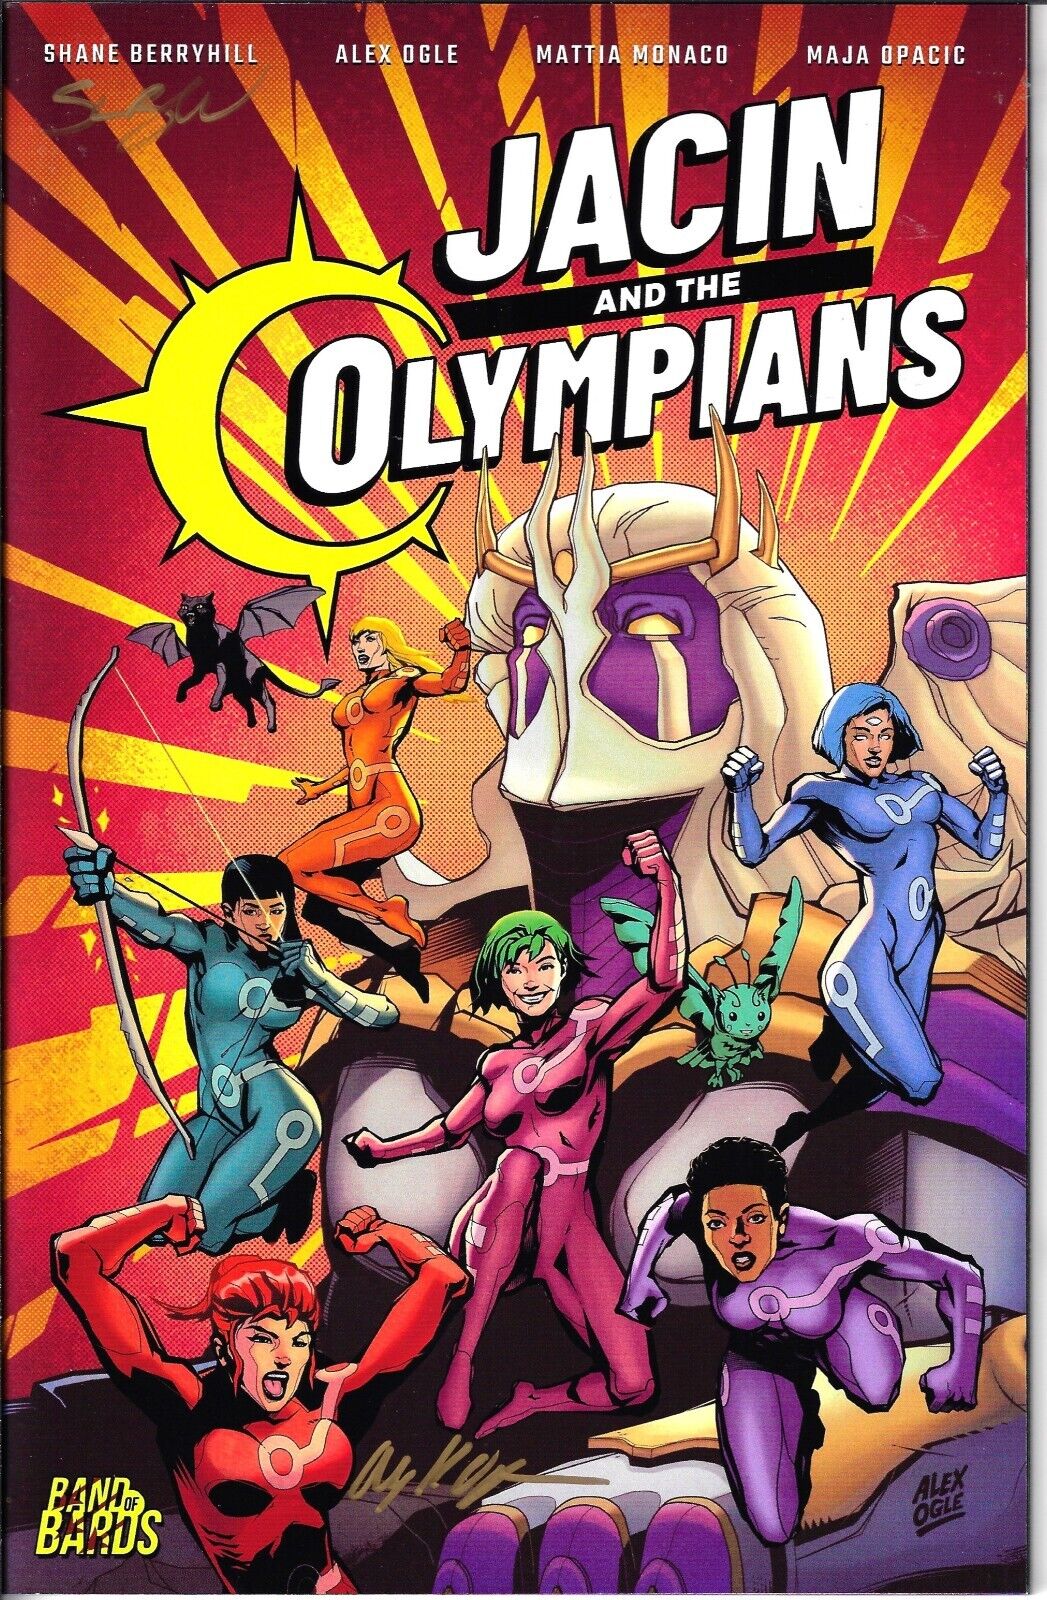 Jacin and the Olympians #1 Signed by Alex Ogle/Shane Berryhill 2023 EB204